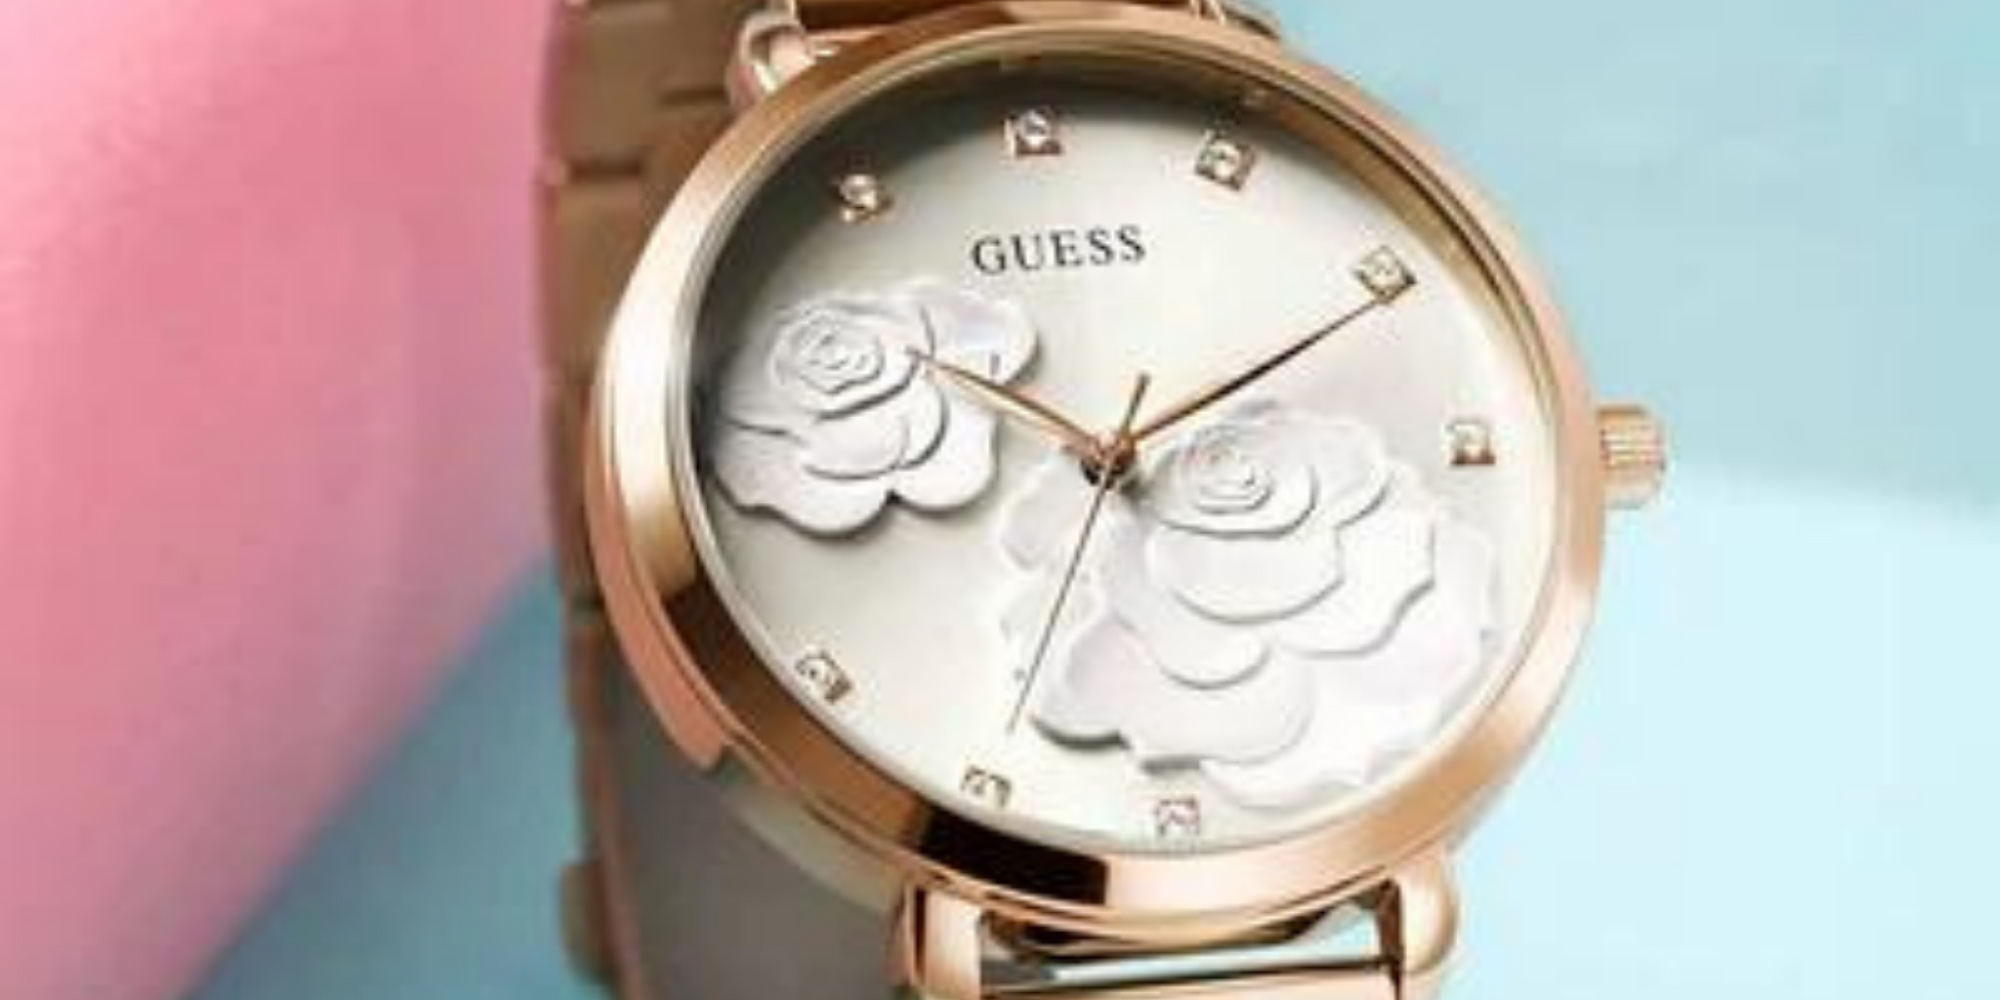 rose gold guess watches, guess rose gold watch for ladies, guess ladies watches rose gold, rose gold guess watch ladies, guess rose gold watch womens, womens guess watch rose gold